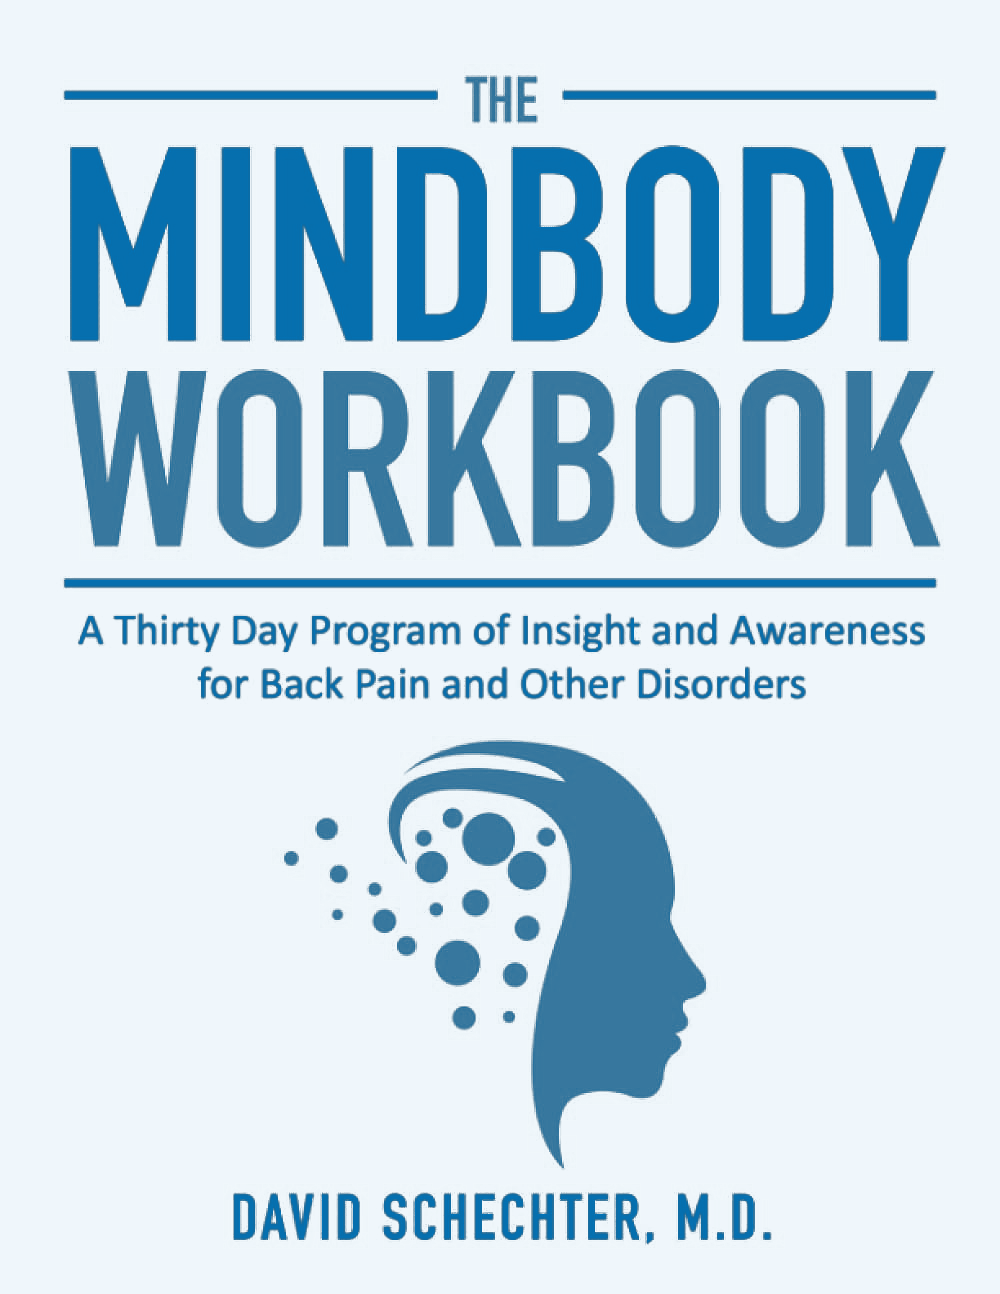 Cover of the book The Mindbody Workbook by Dr. David Schechter.